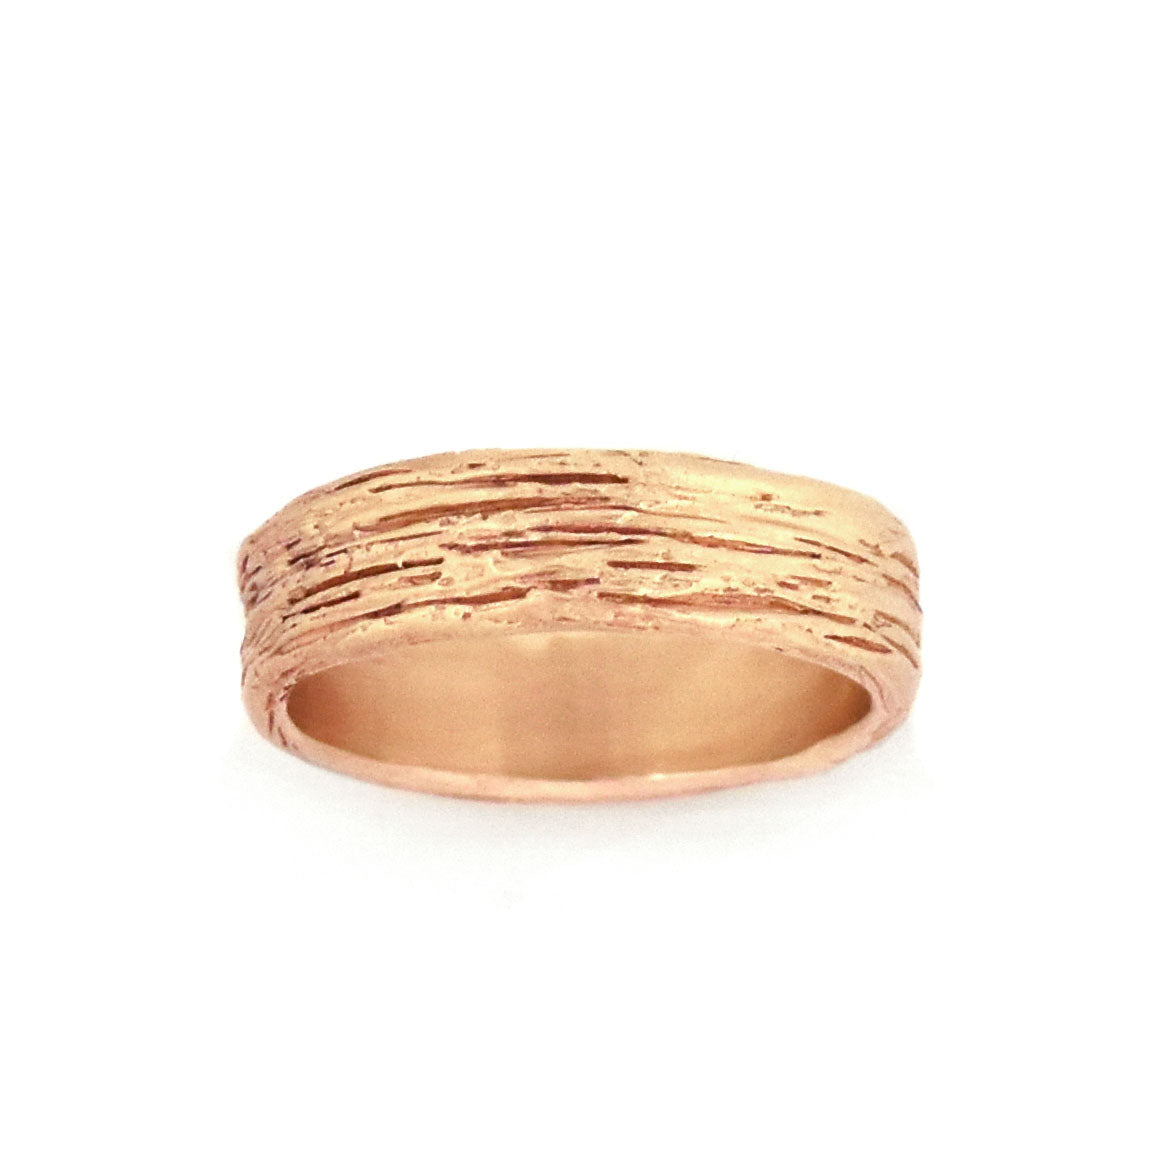 Gold Timber Ring - your choice of gold - Wedding Ring  18K Palladium White Gold  14K Rose Gold 3913 - handmade by Beth Millner Jewelry